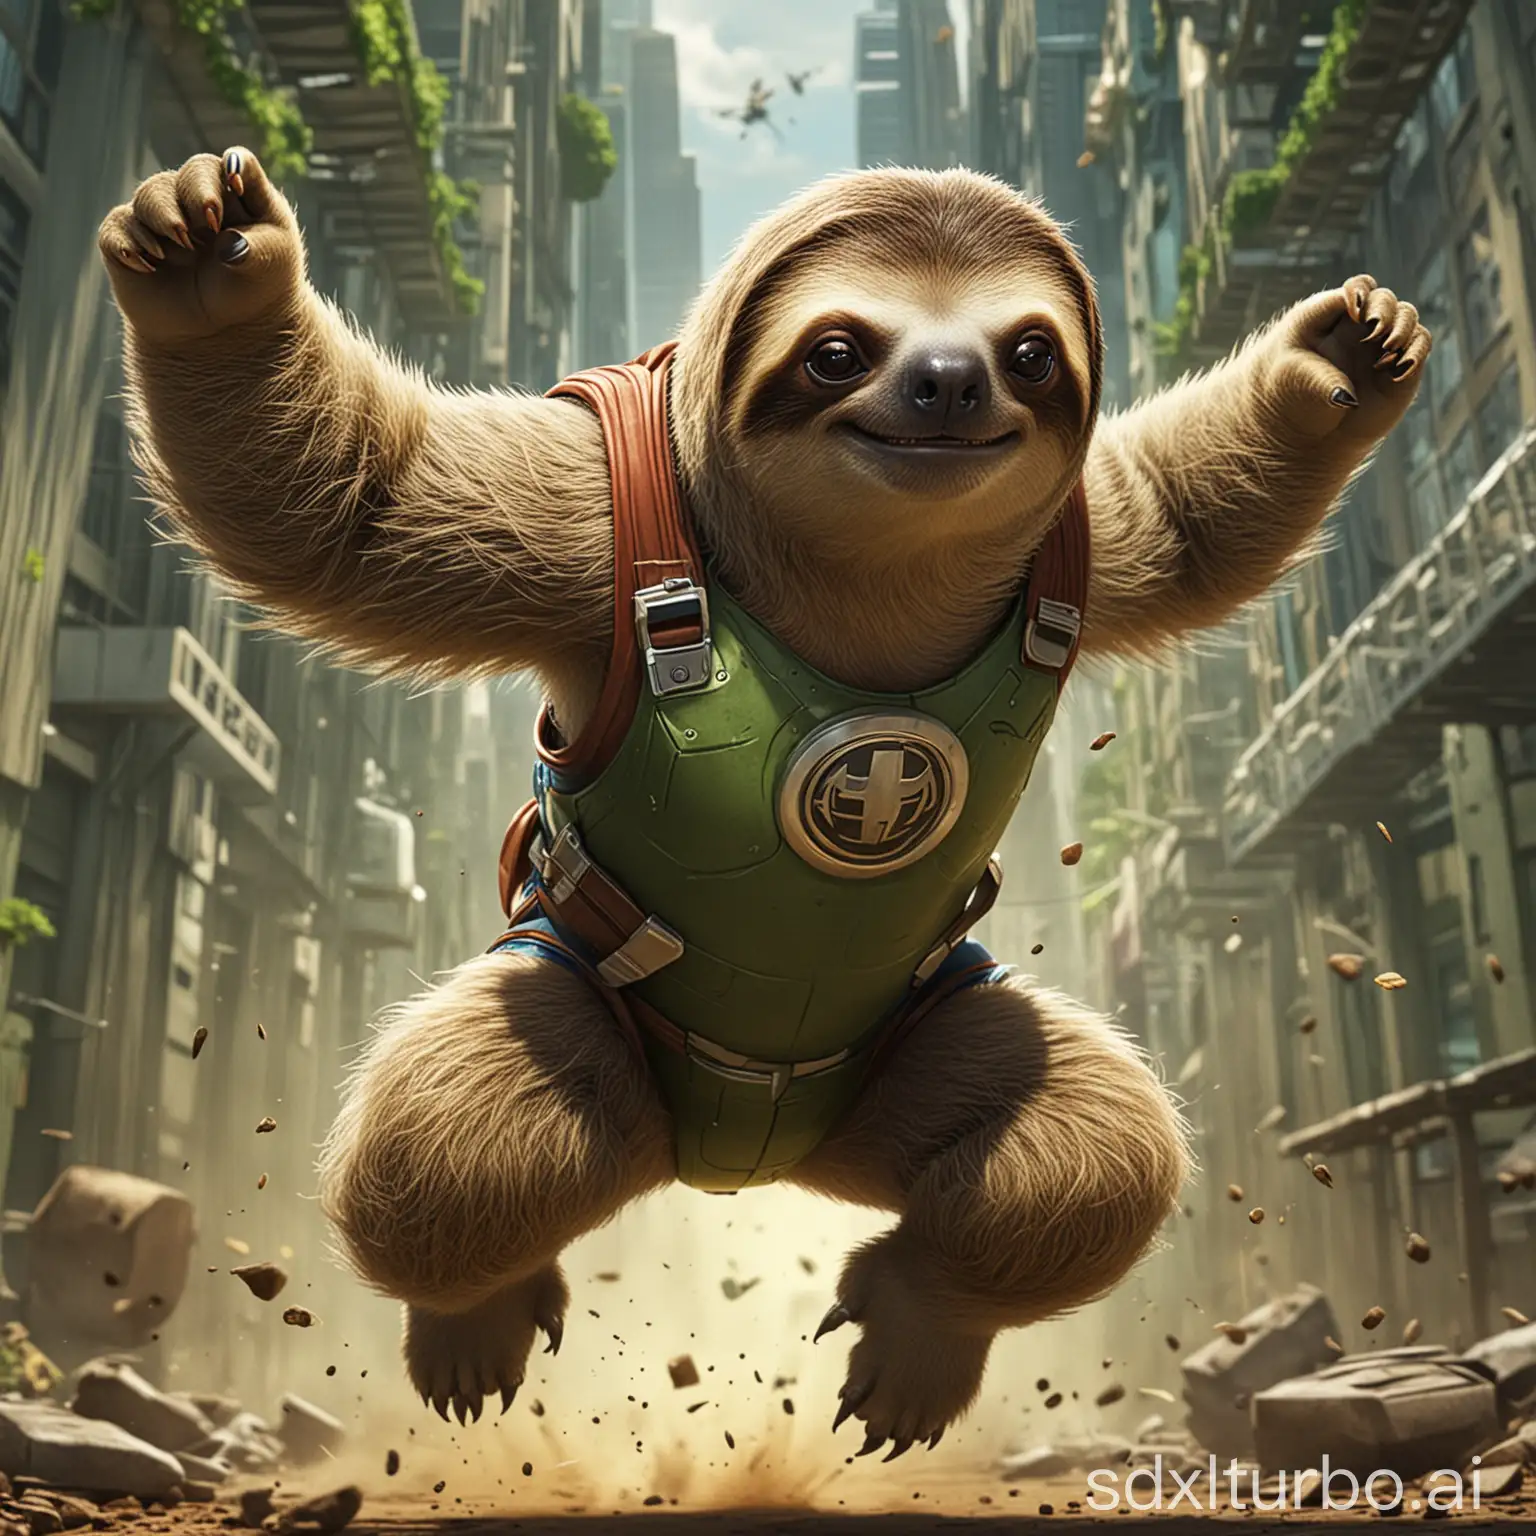 A turbo-fast sloth with superpowers like those of Hulk.